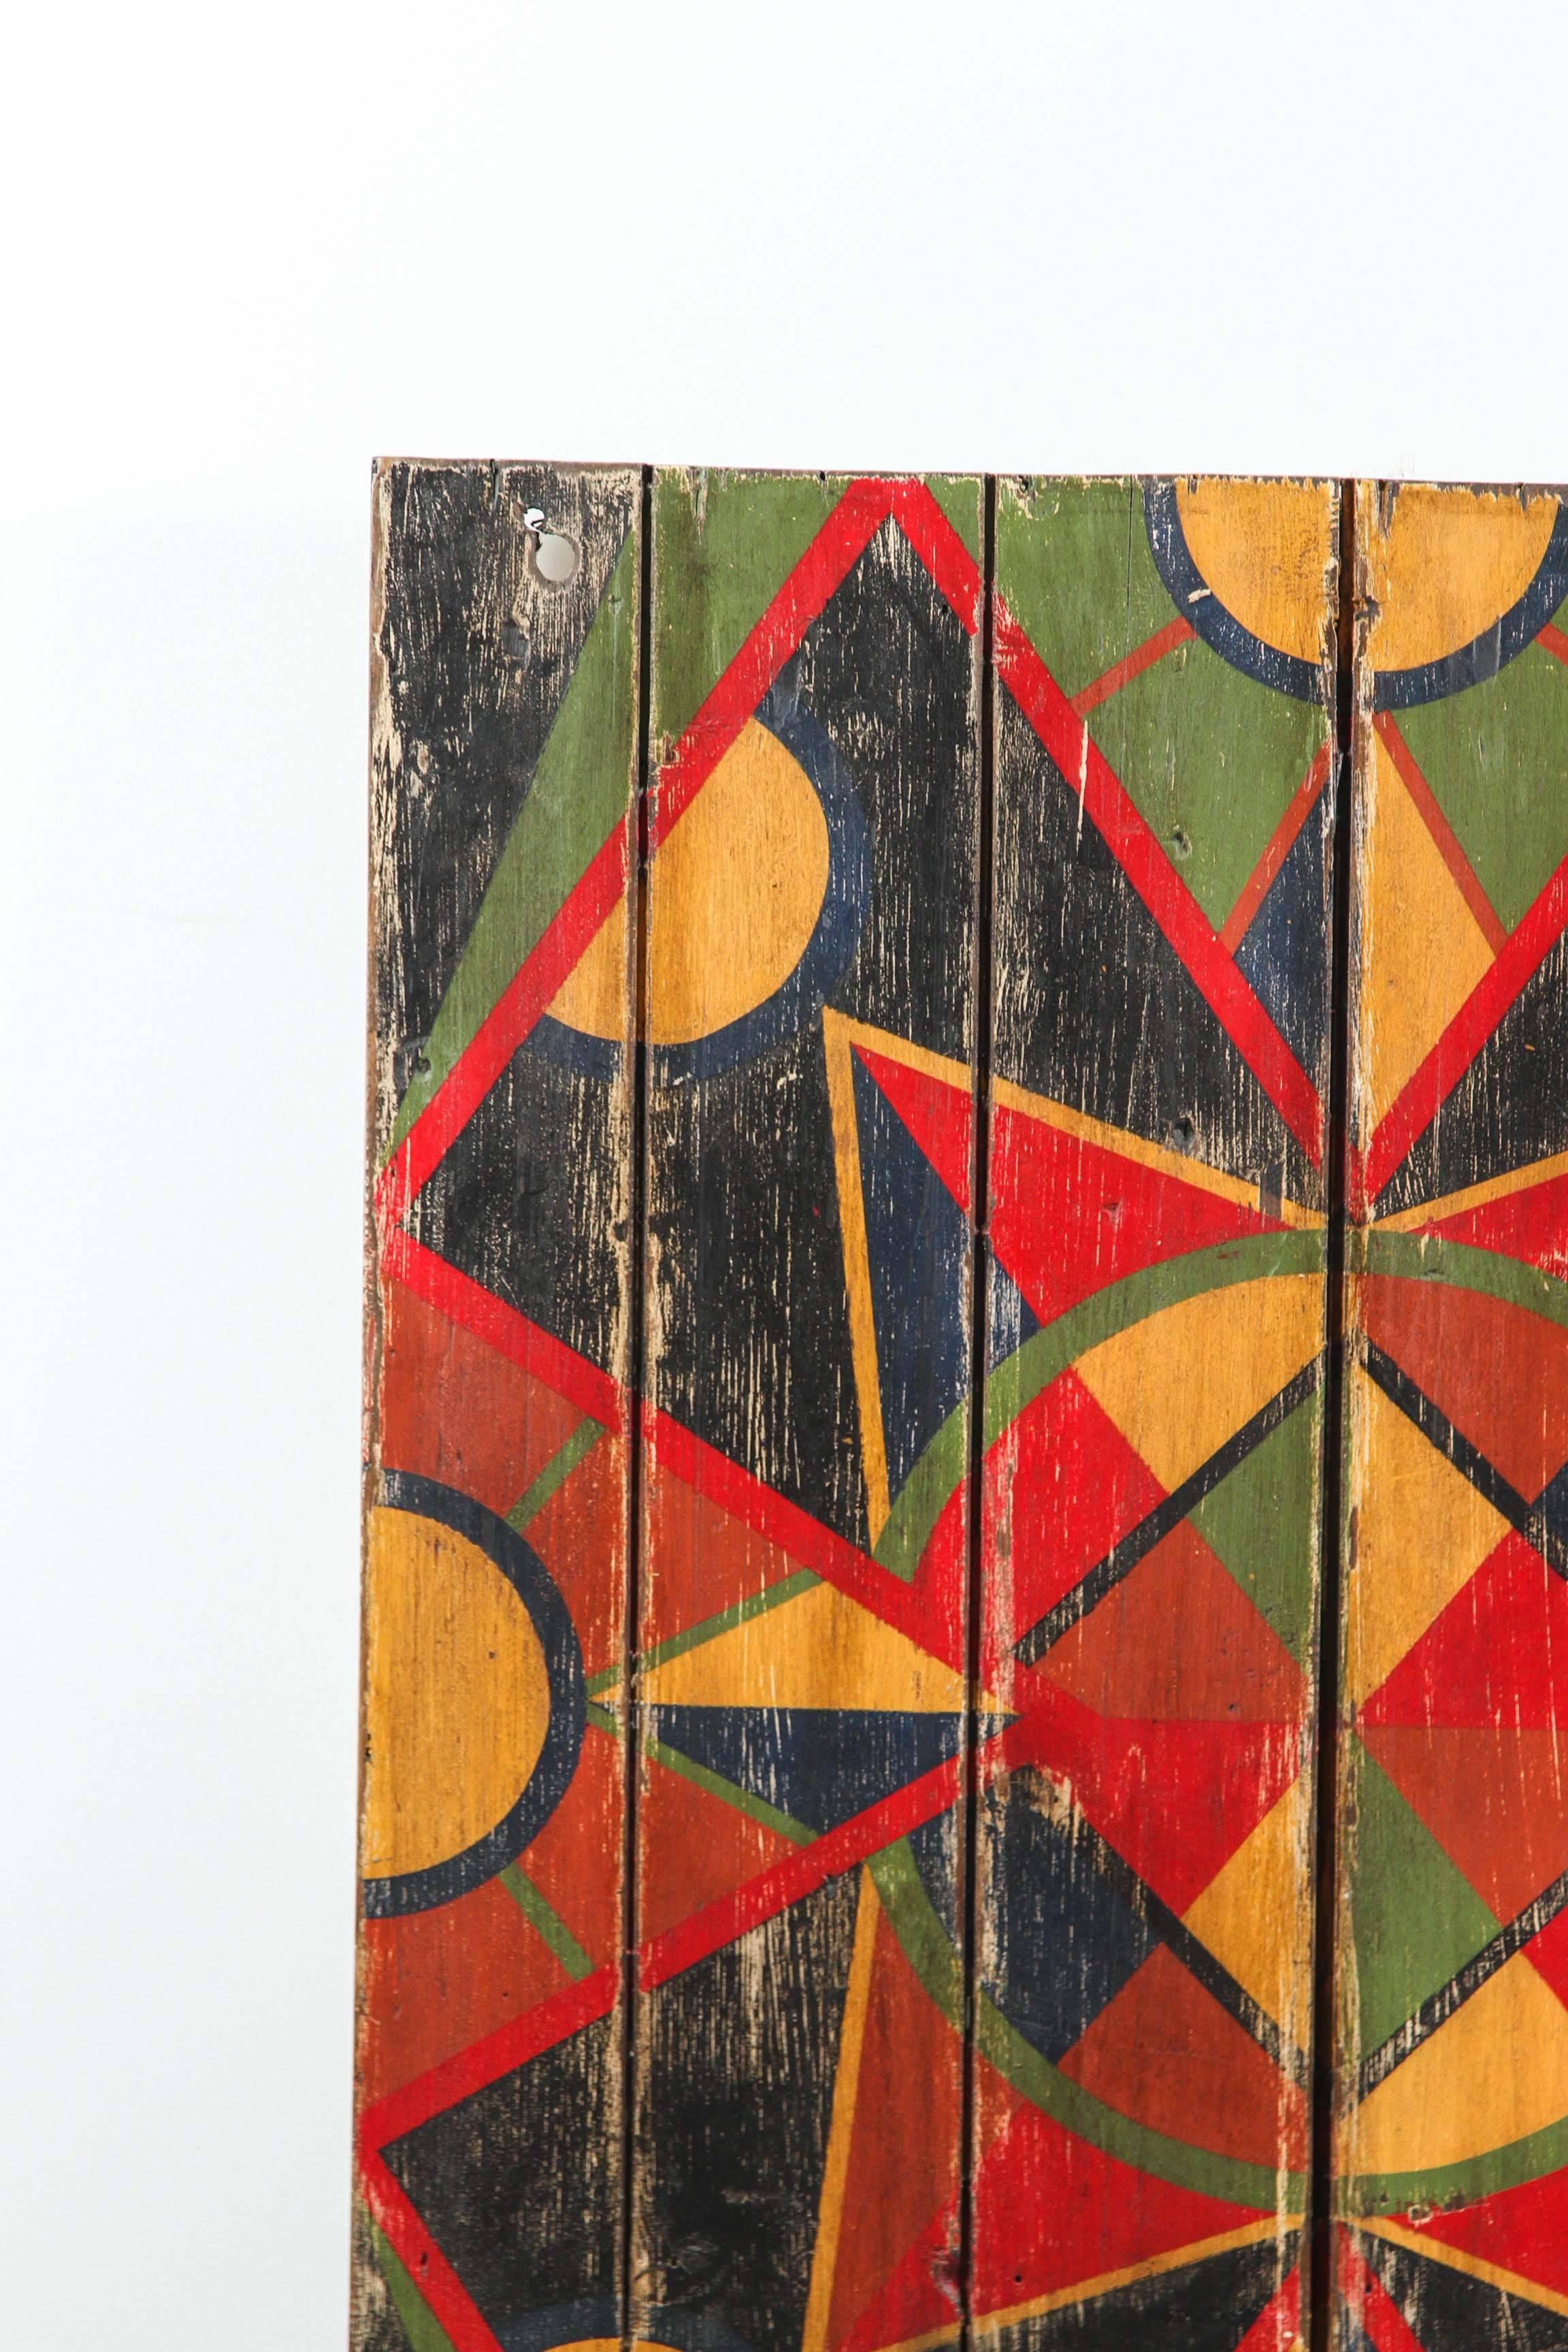 Bold geometric abstract board found in Texas. We have a collection of these boards from an anonymous artist. Painted on recycled cupboard doors, table tops, stool tops and bread boards. Very dynamic when hung in collections.

This board was